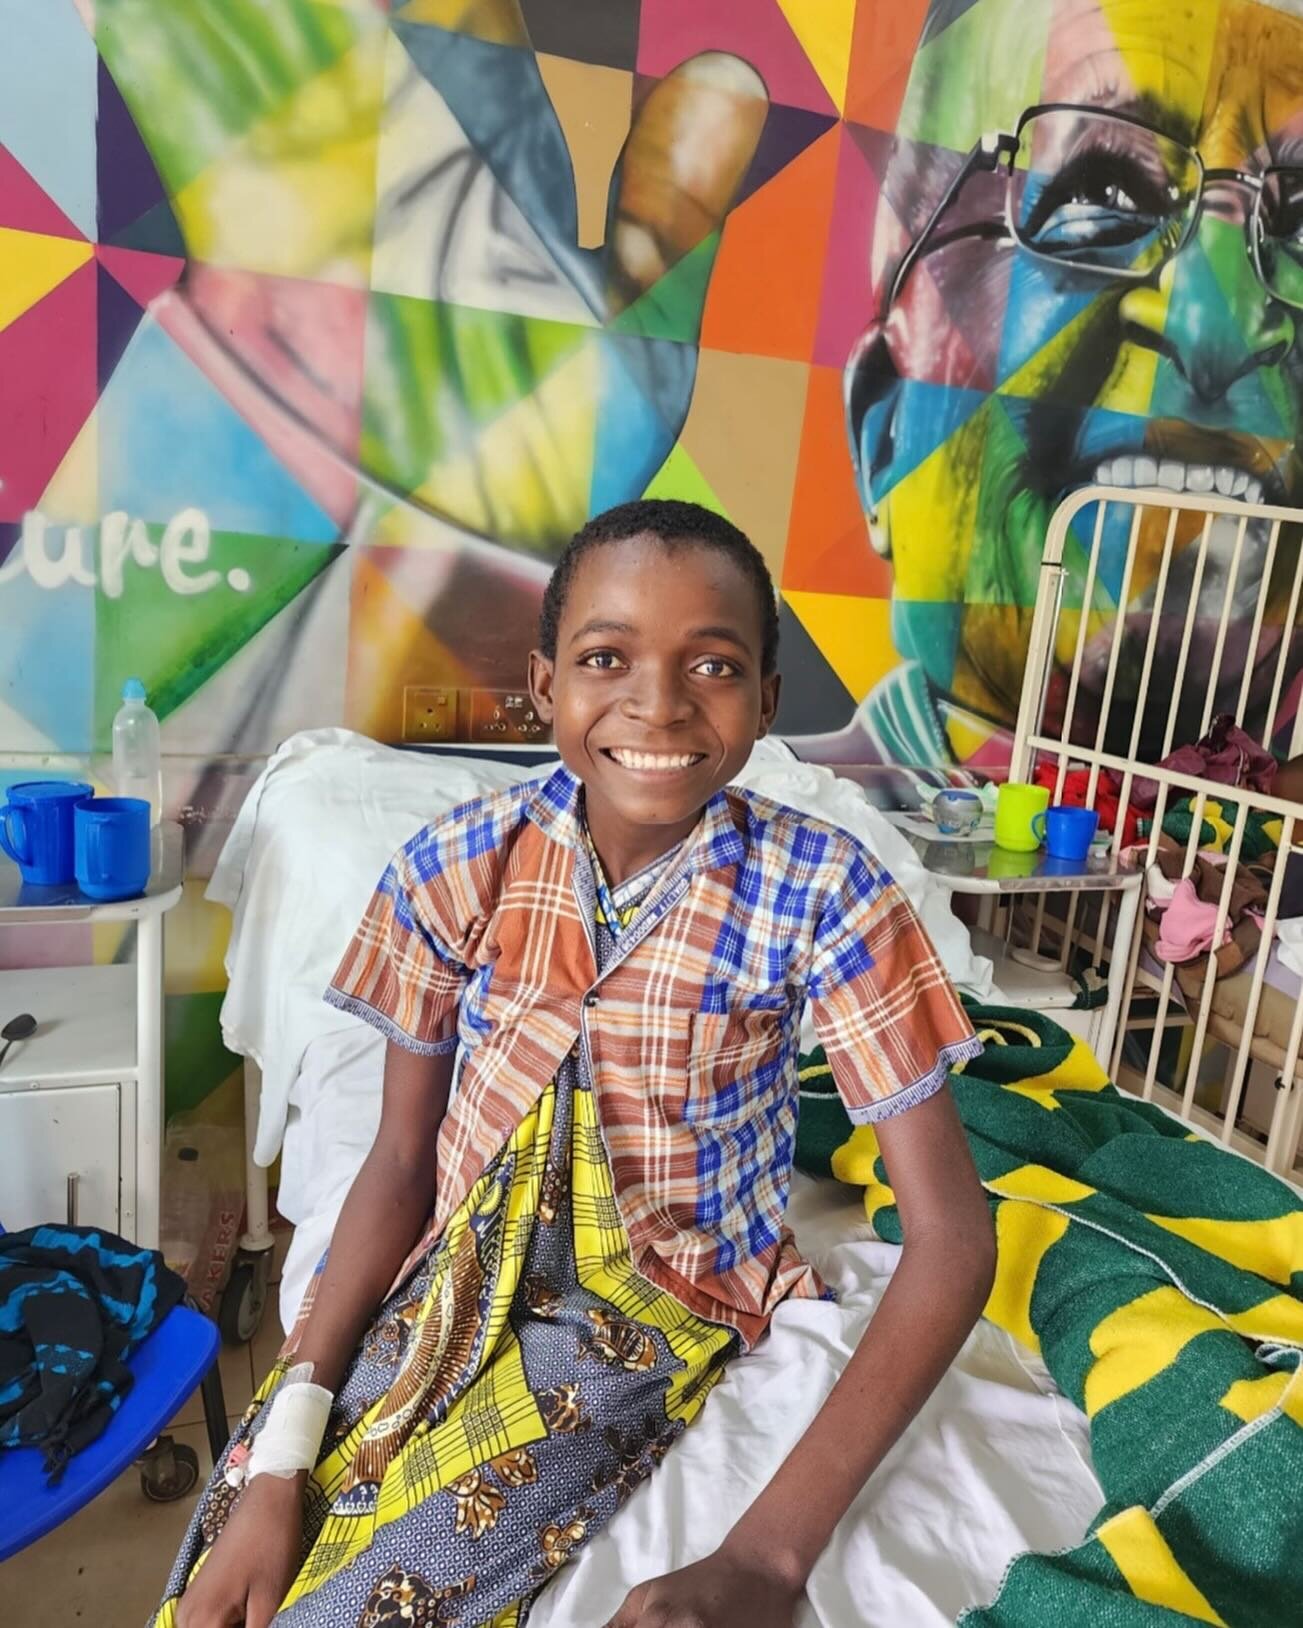 Hailing from Chiradzulu, Malawi, Luka Charles is a 16-year-old who has endured a long history of insufferable abdominal pains and bloody urine. He is the eldest of 4 children, but has watched his younger siblings surpass him in education. Currently a